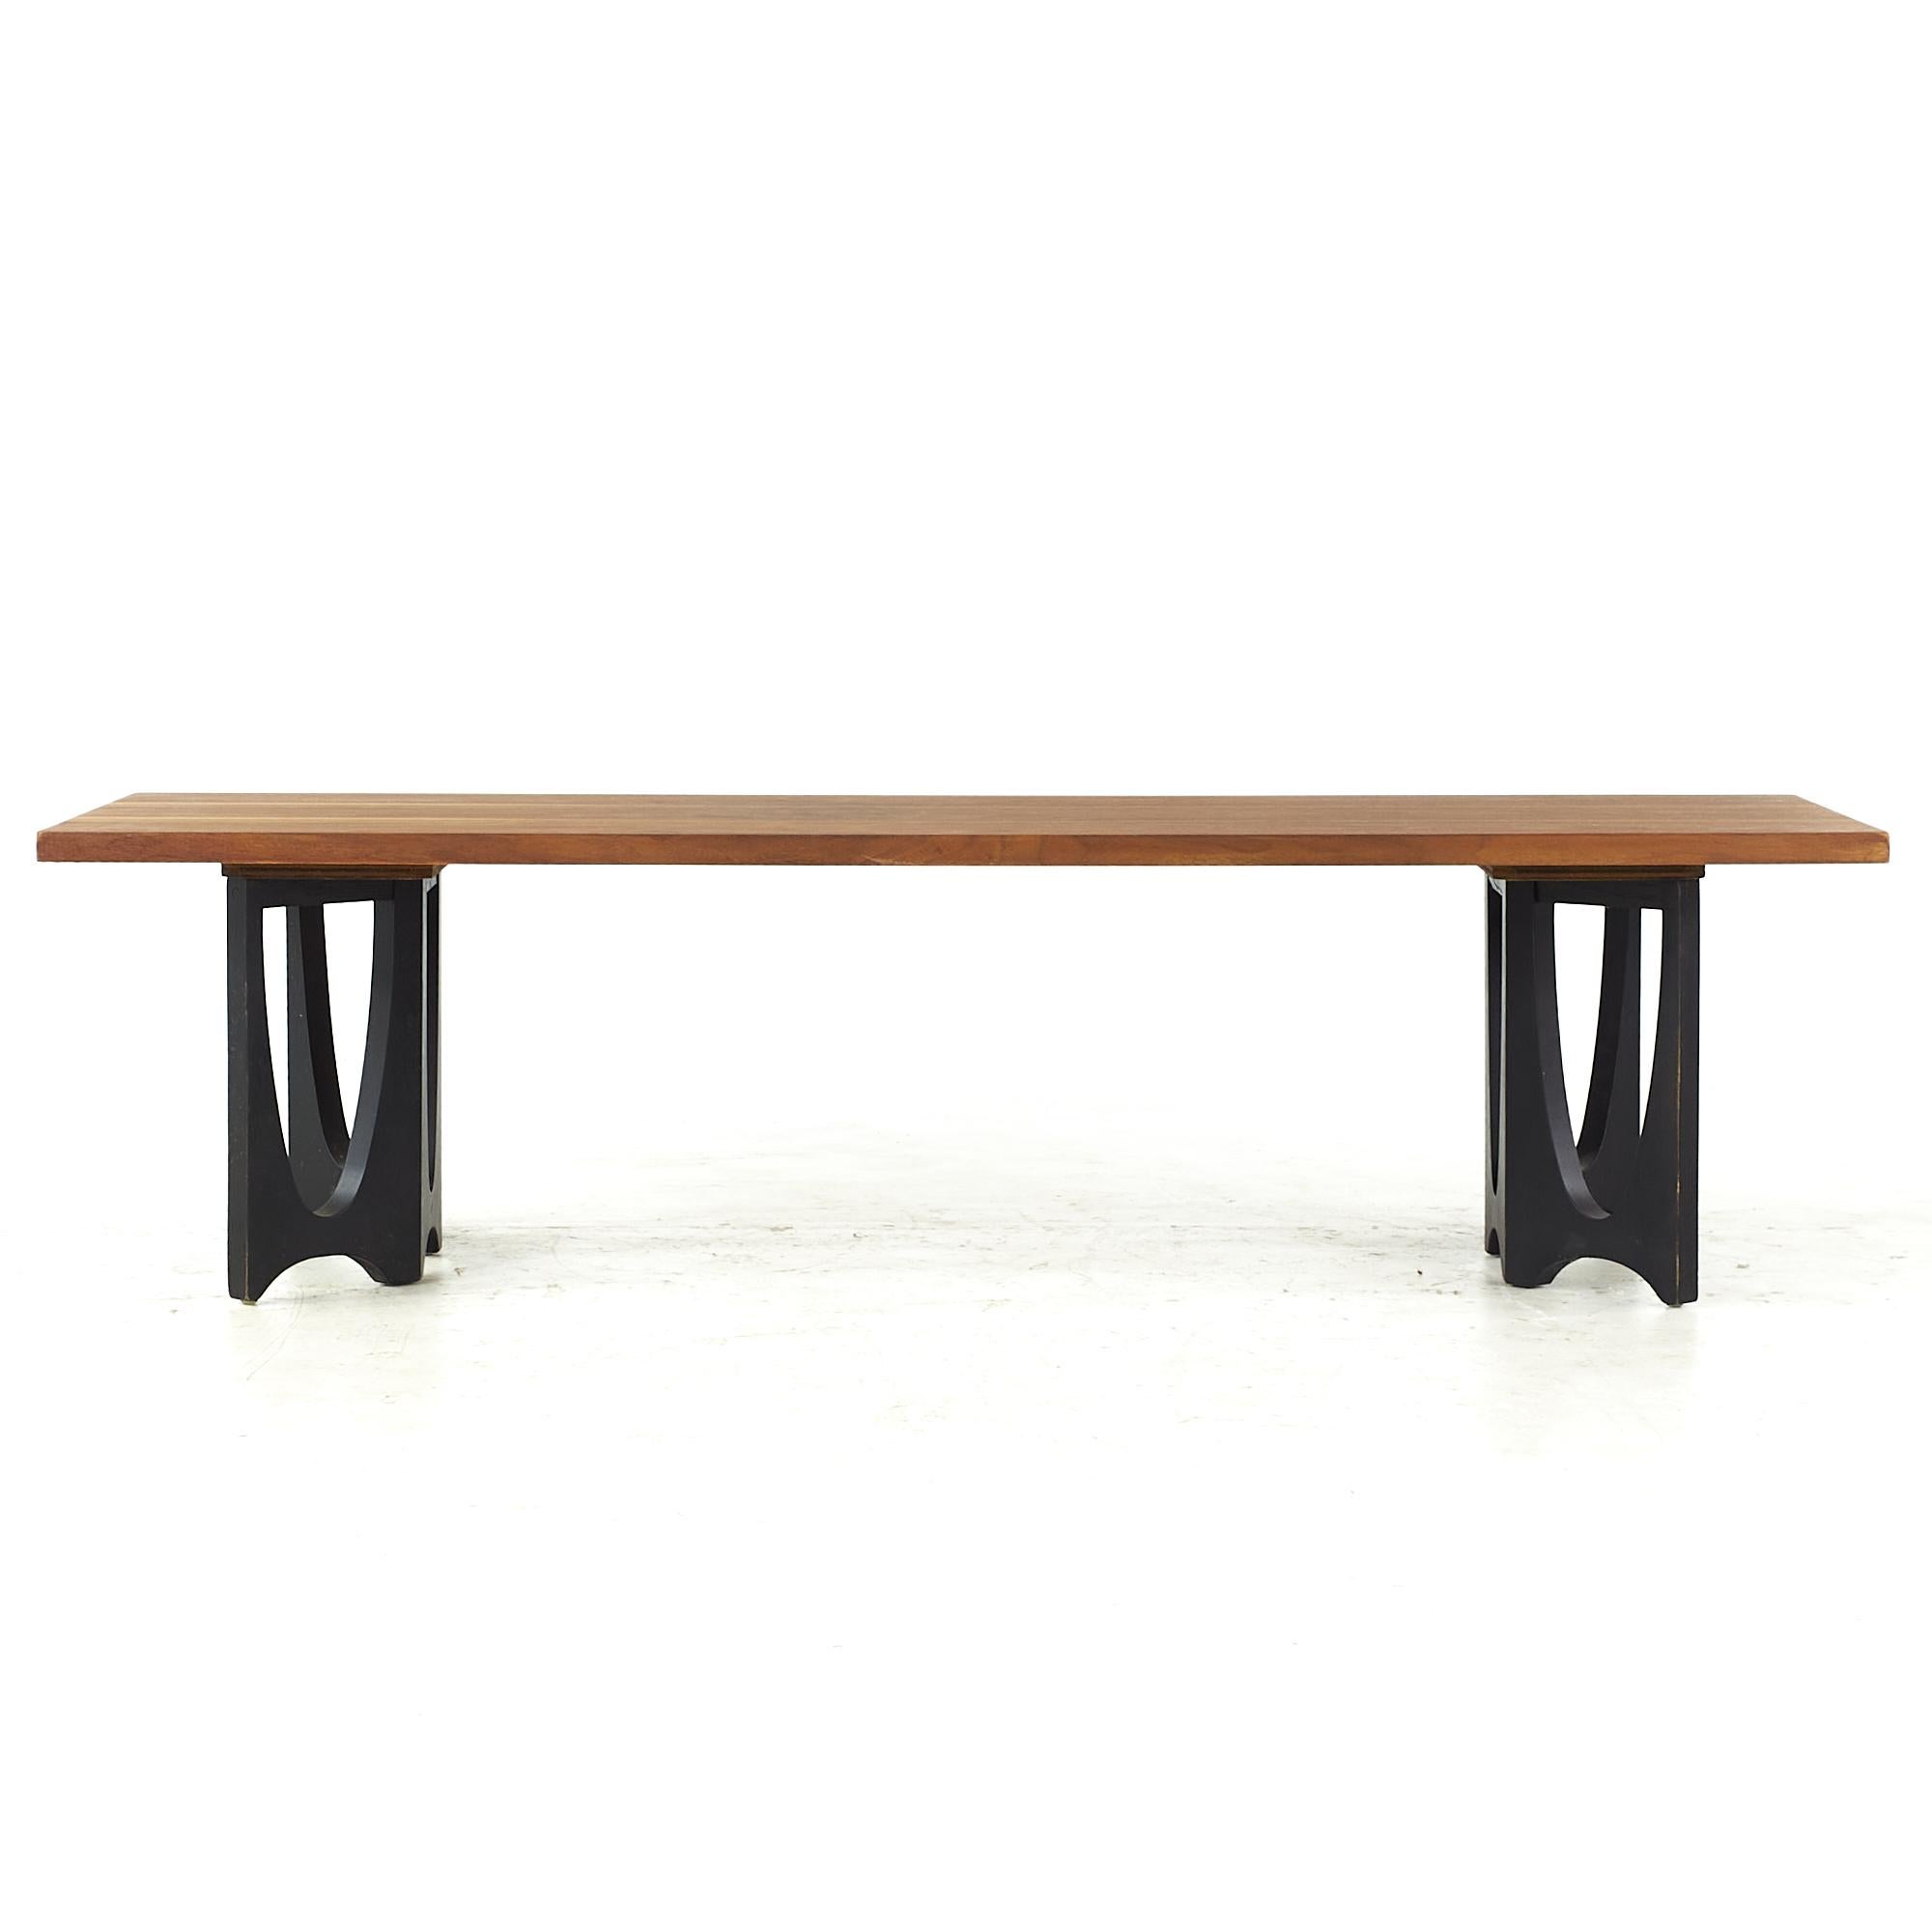 Broyhill Brasilia midcentury walnut coffee table

This coffee table measures: 60 wide x 22 deep x 15.75 inches high

All pieces of furniture can be had in what we call restored vintage condition. That means the piece is restored upon purchase so